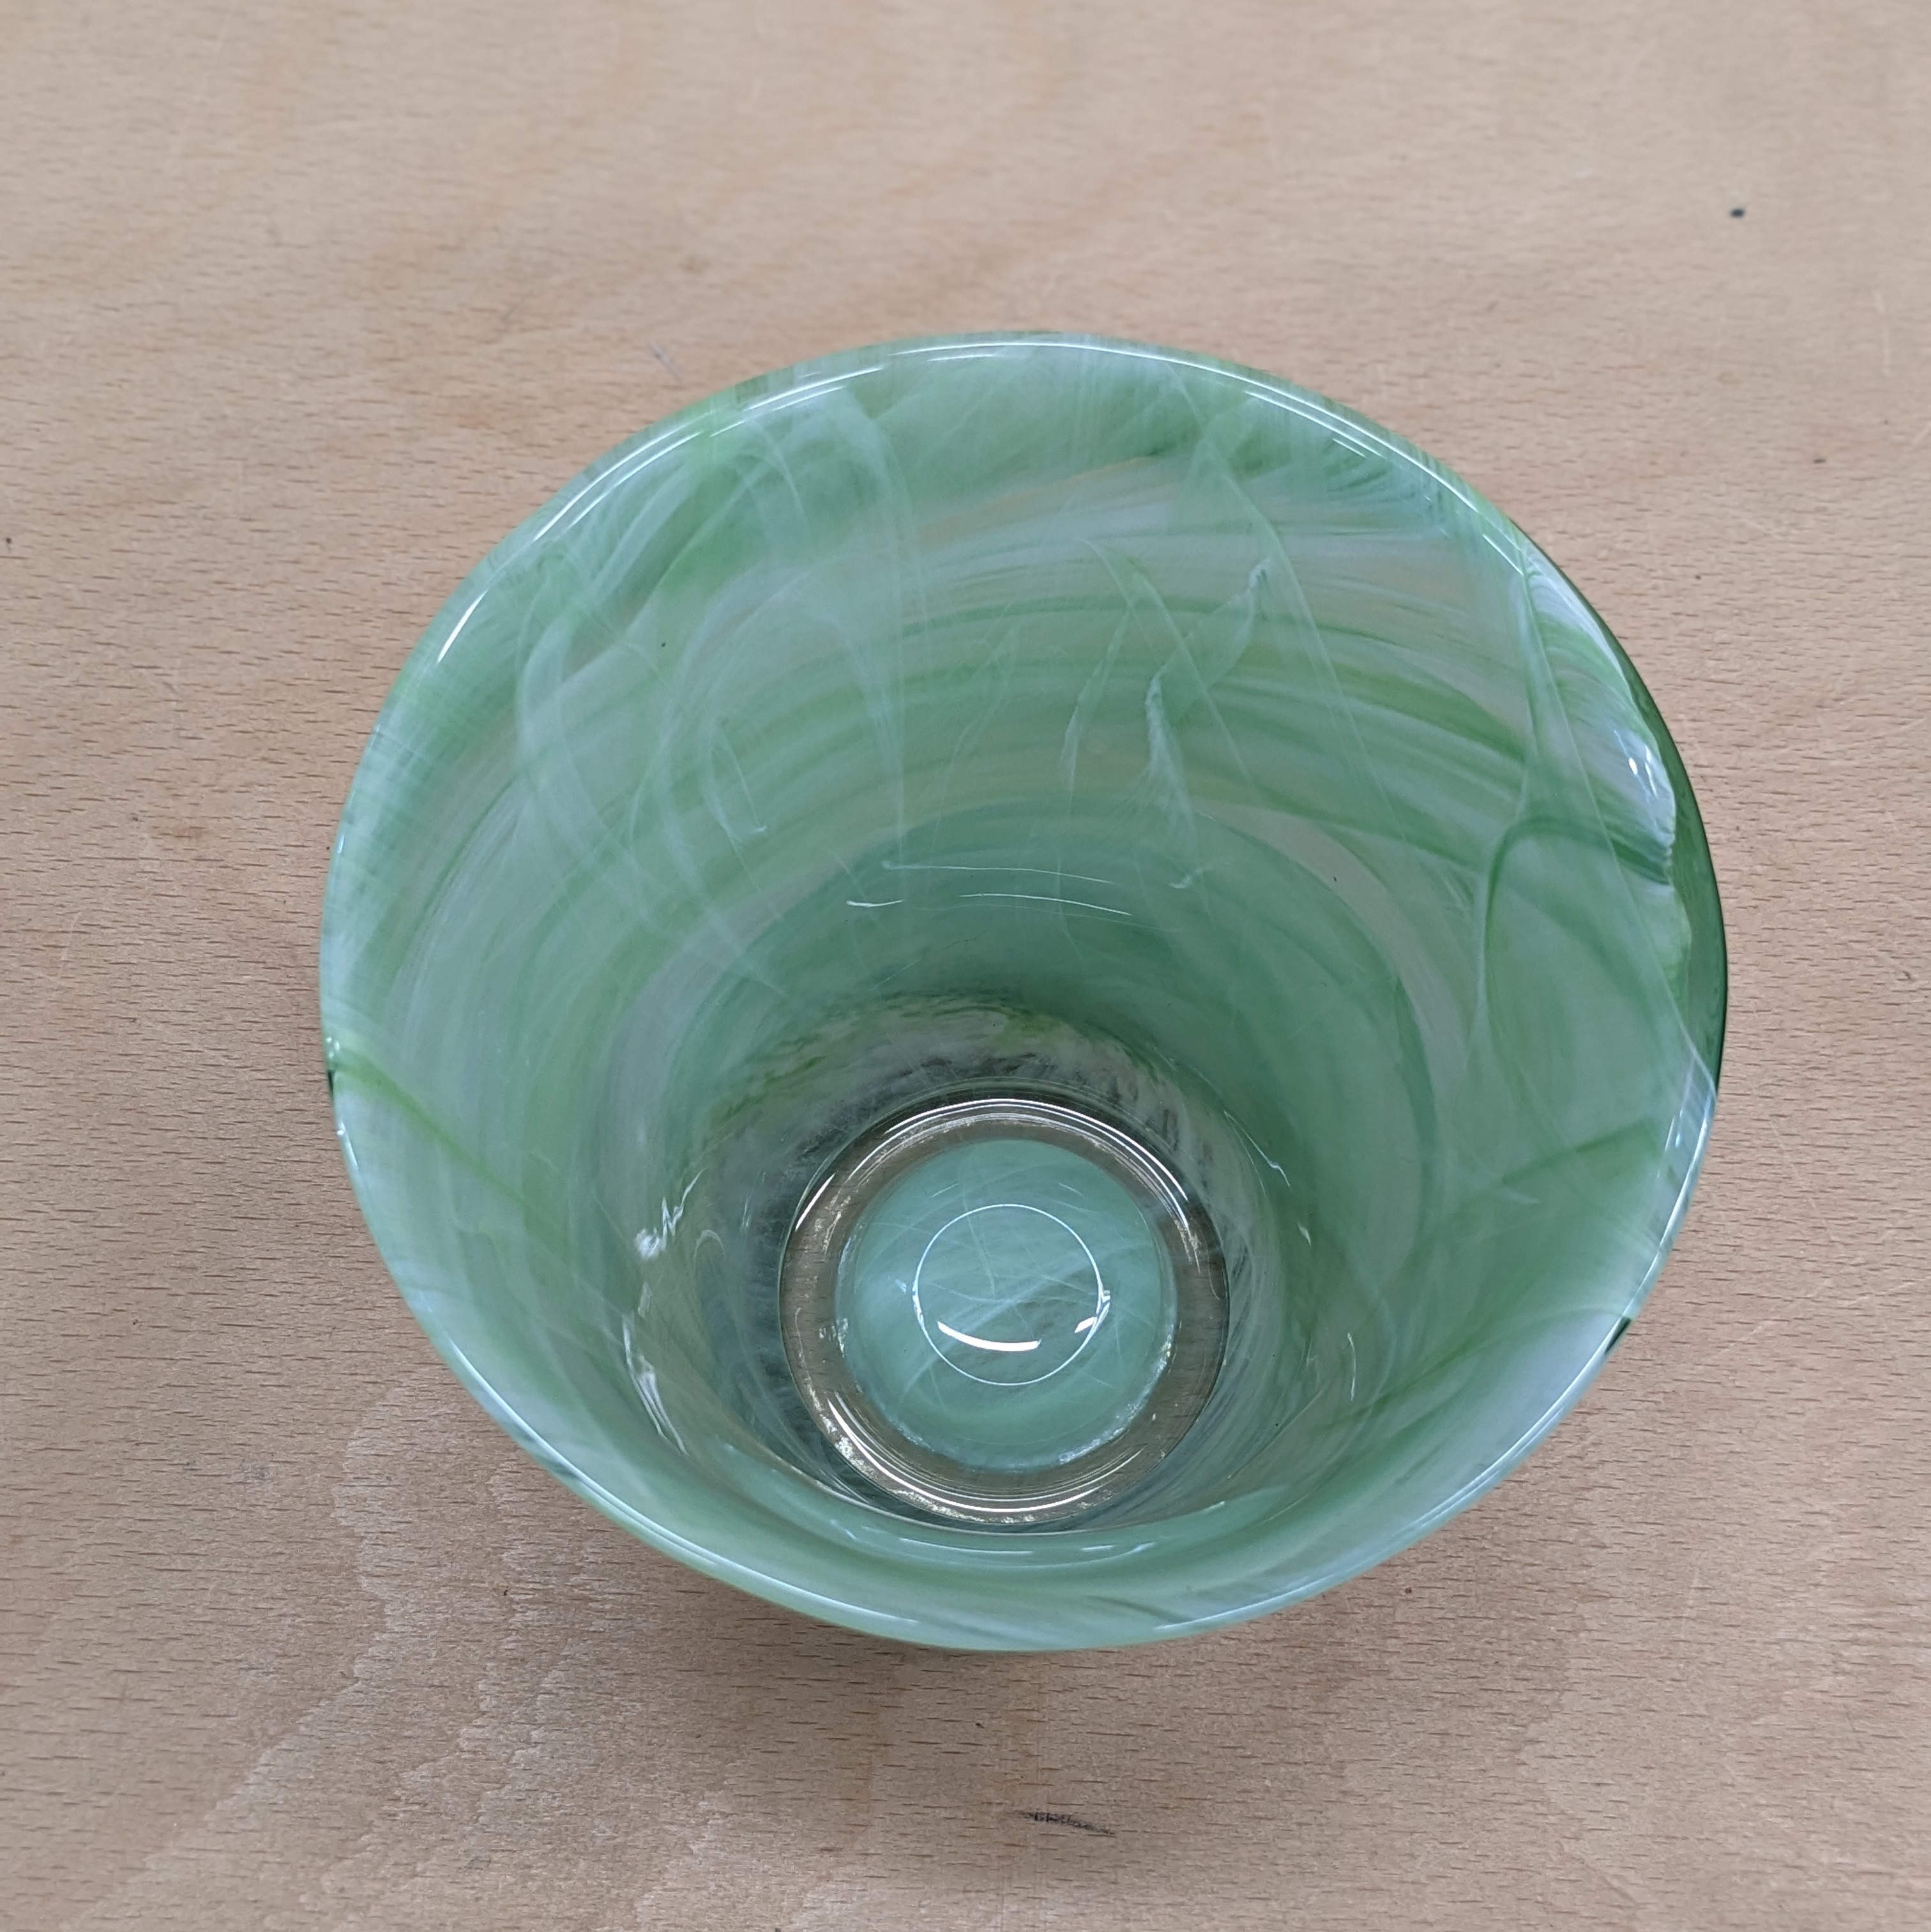 Green glass marbled effect pattern bottom base dome view